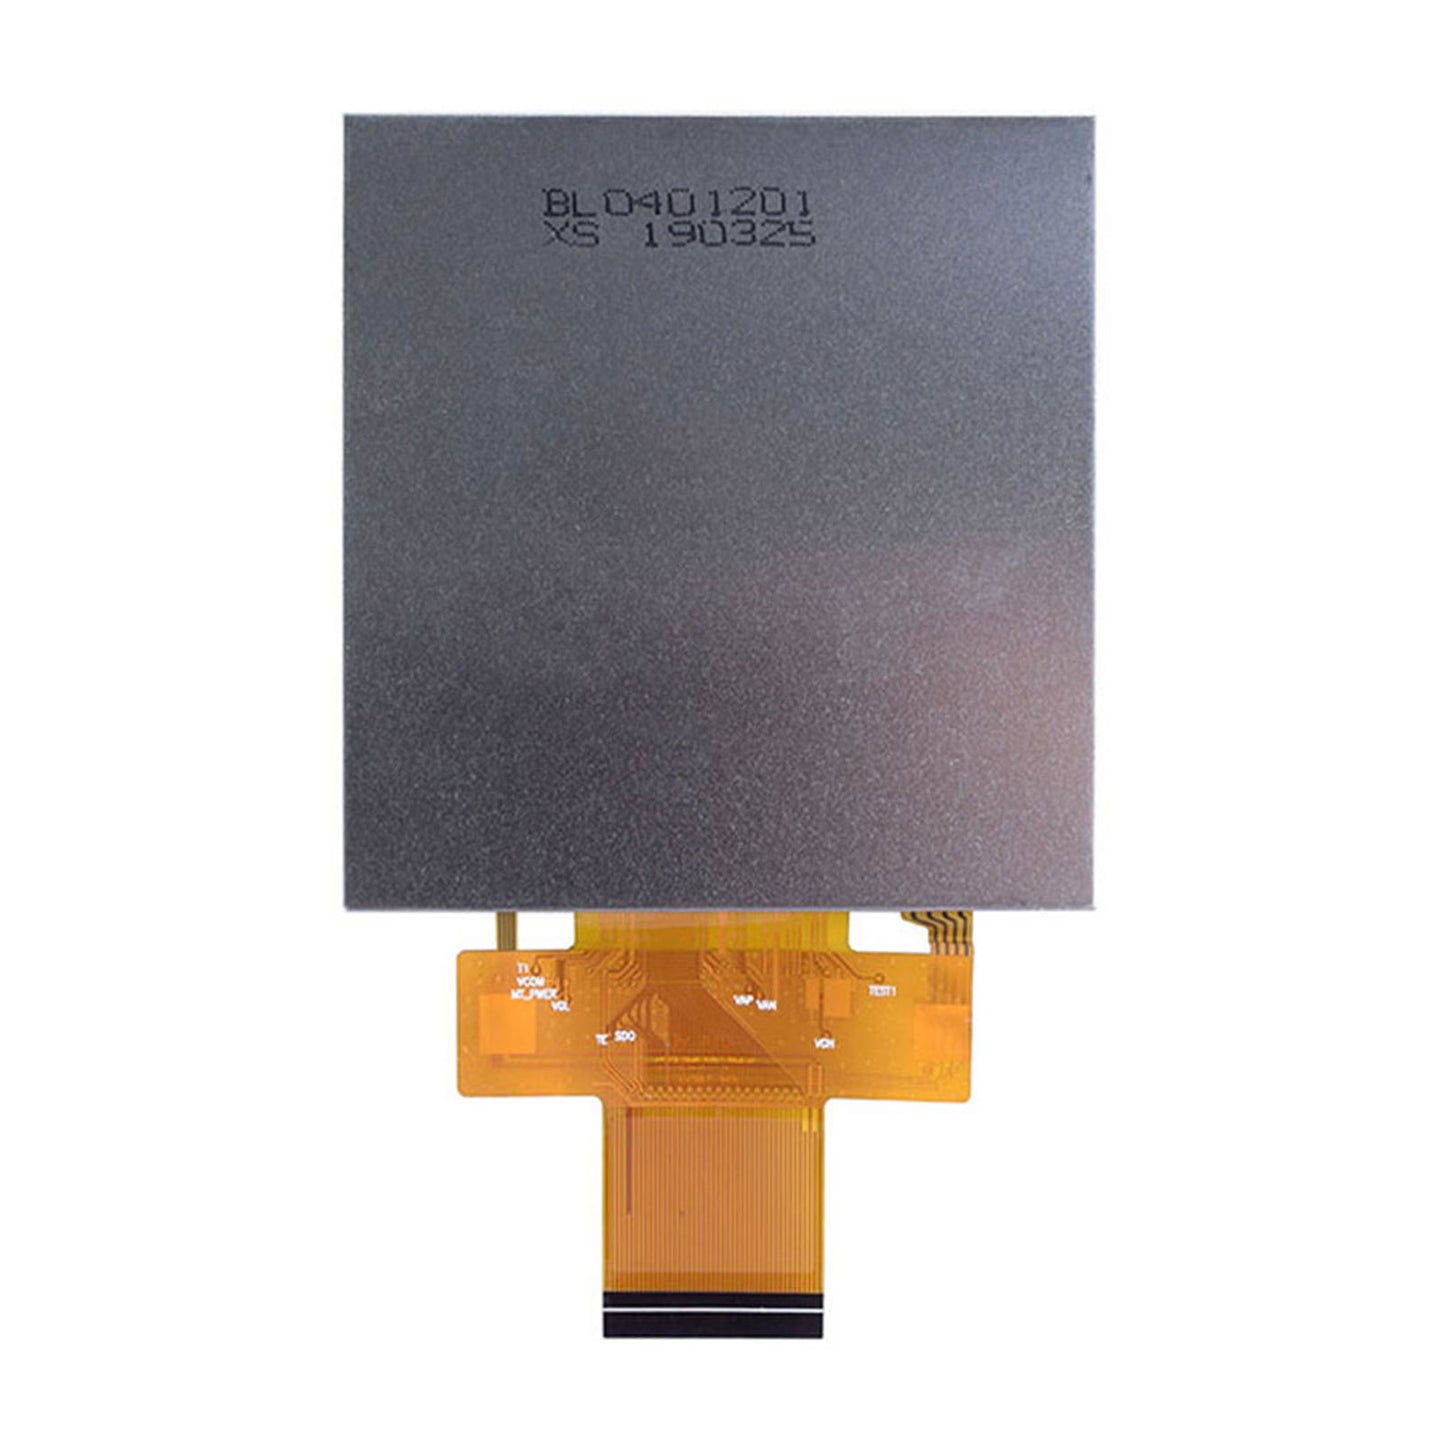 back of 4.0-inch IPS high brightness display panel with 480x480 resolution, resistive touch, using RGB interface